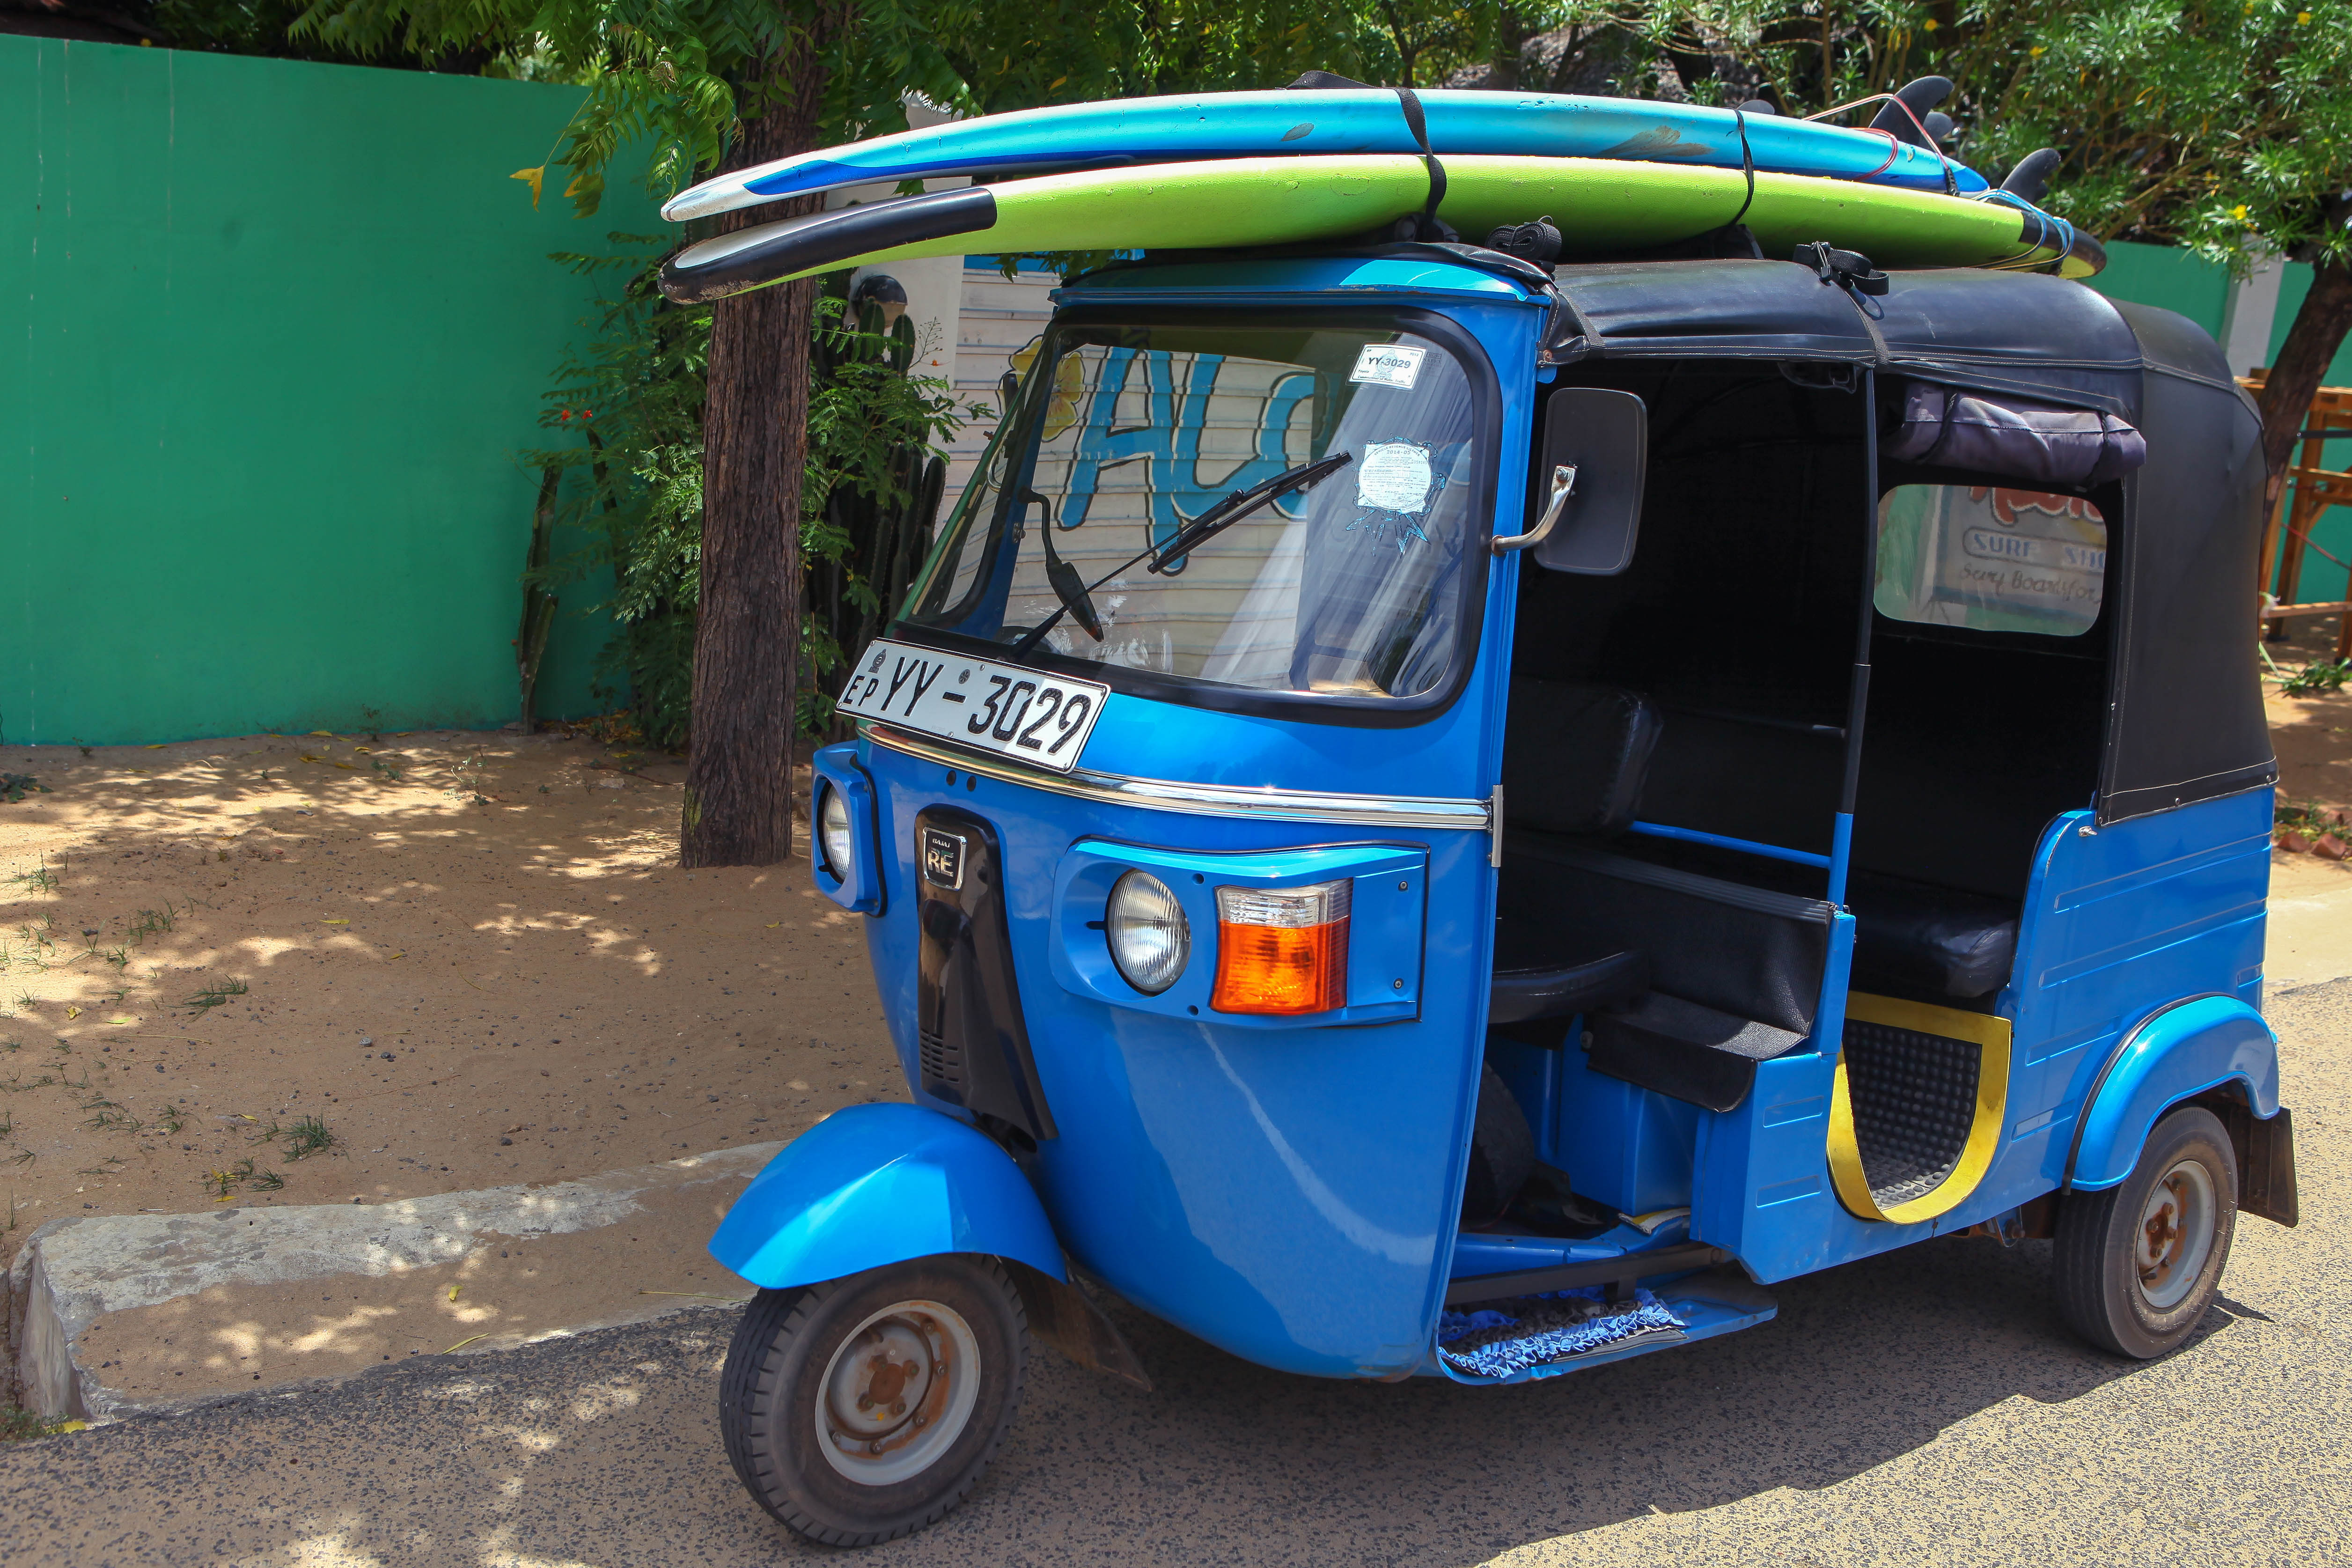 Tuk-tuk – the local means of transportation to the best surf spots. Photo: Charlie Malmqvist.